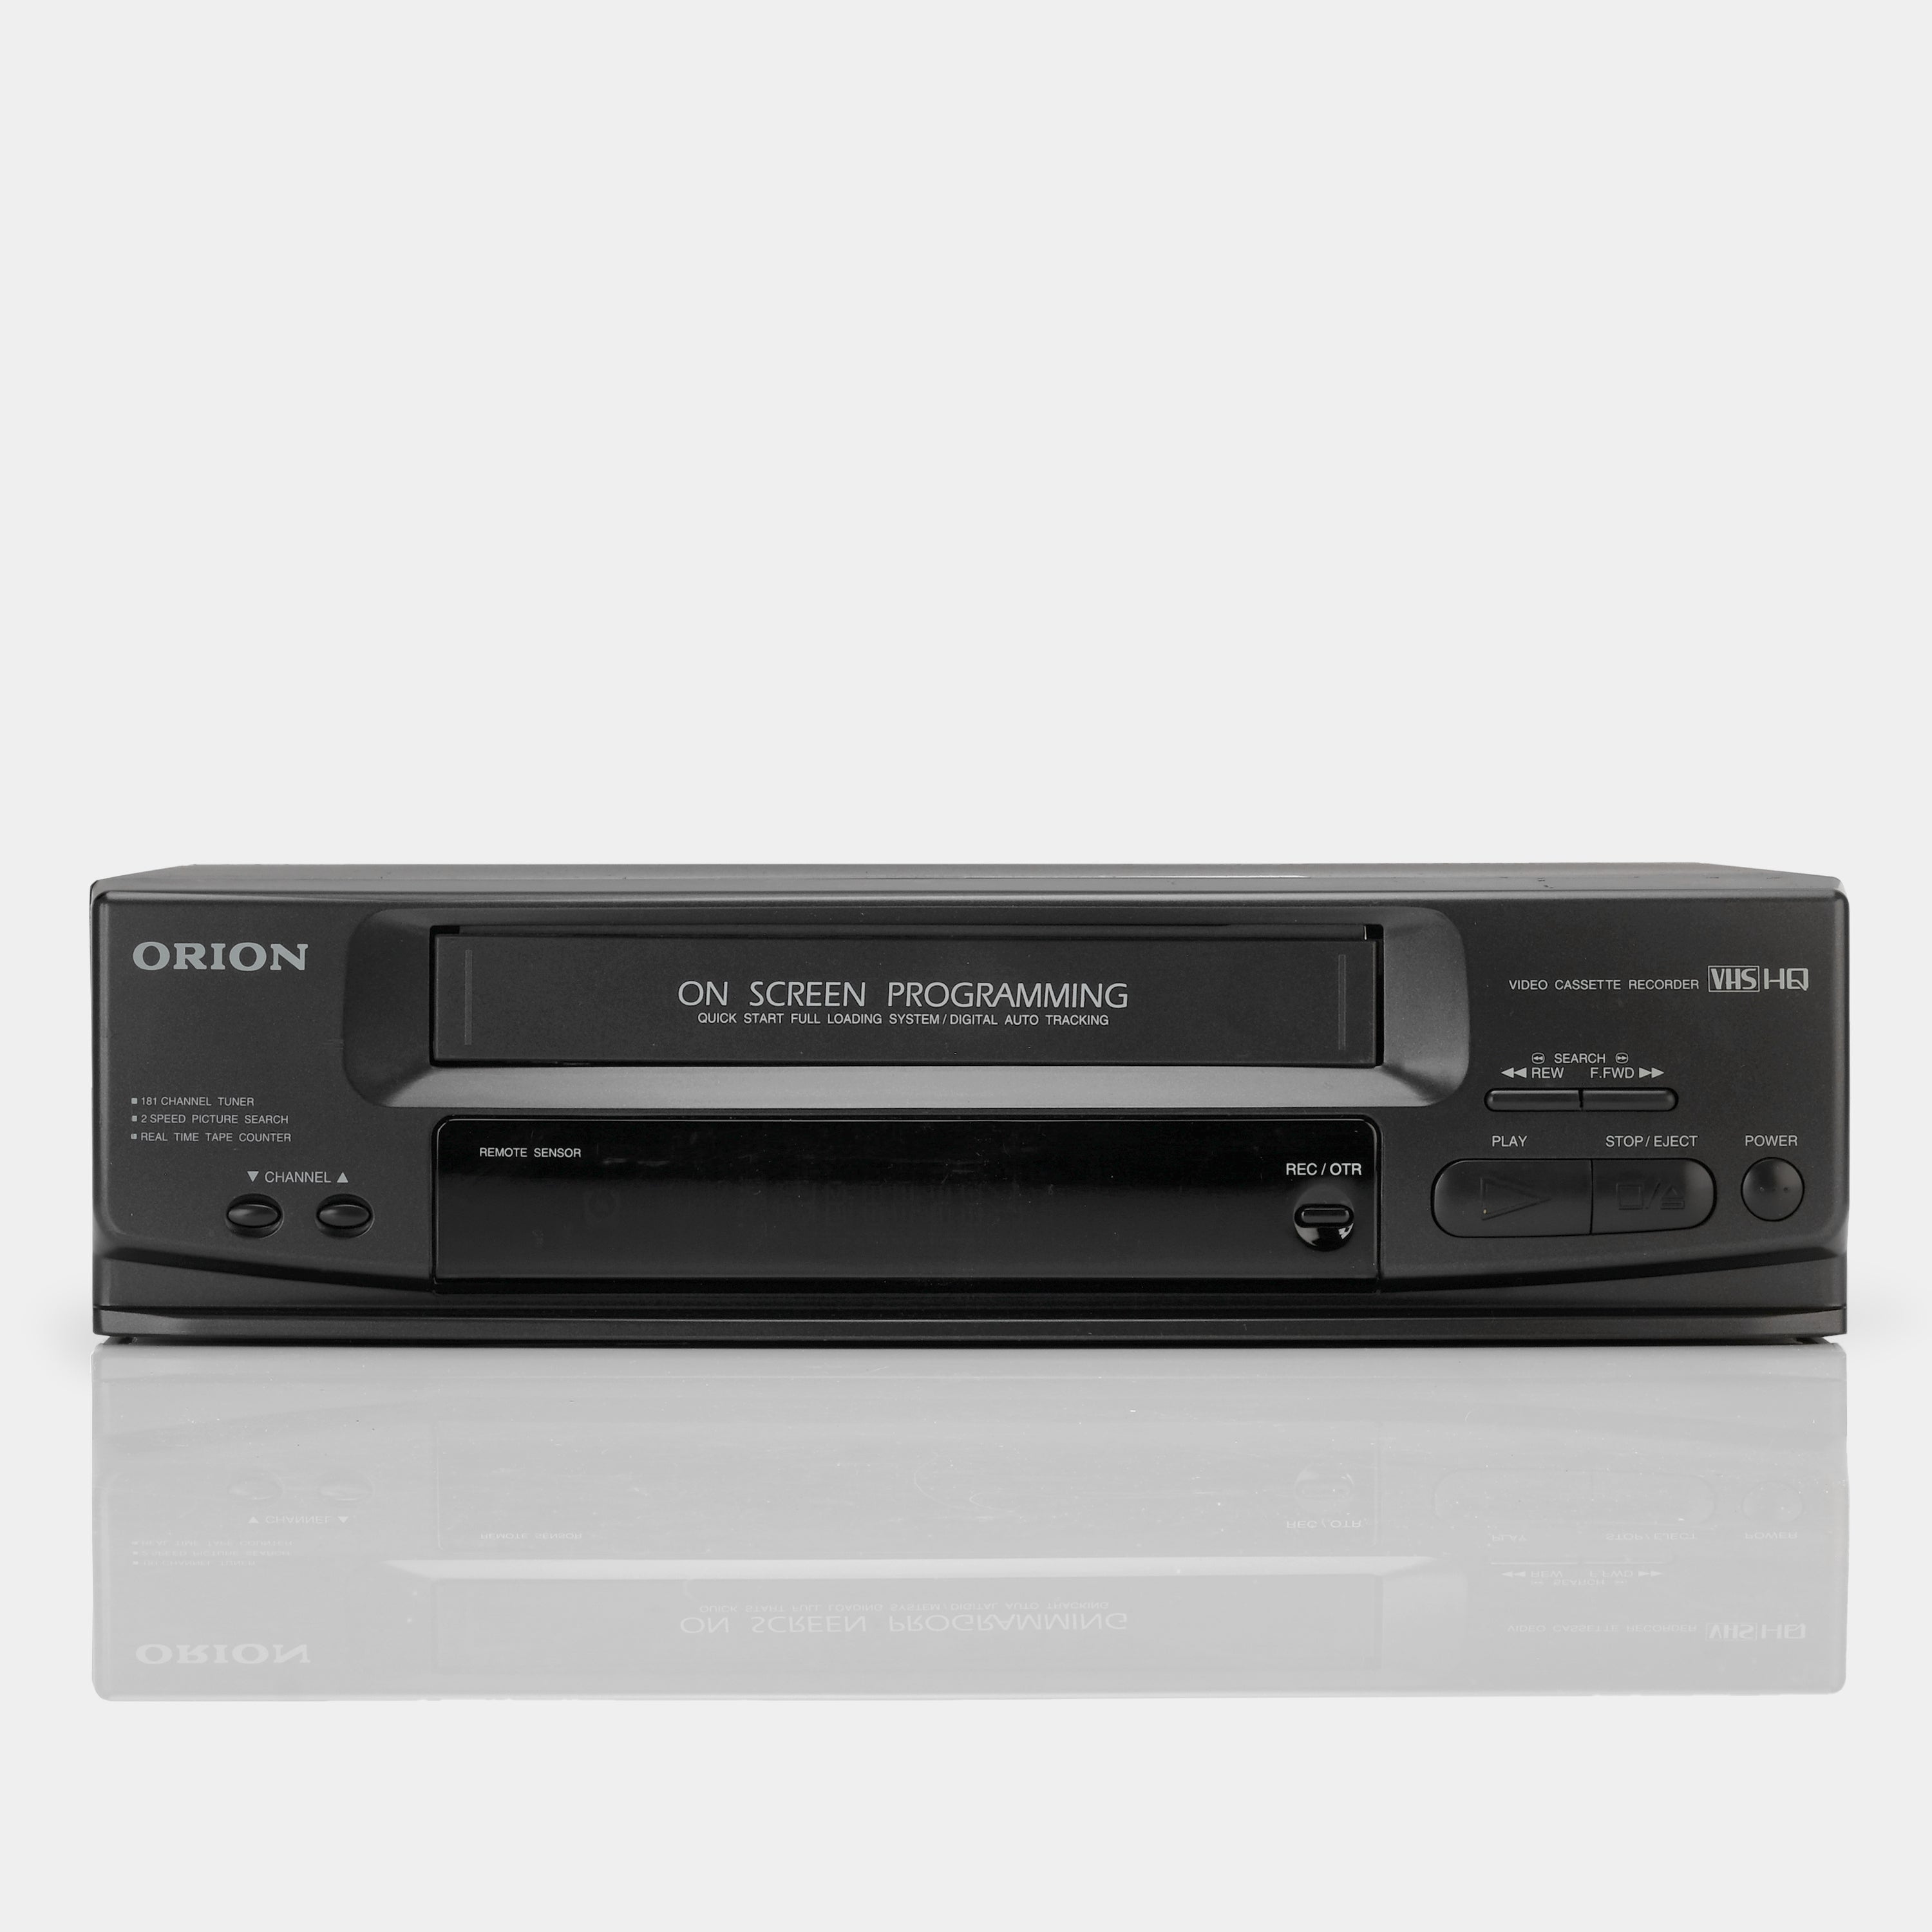 Orion VR0220 VCR VHS Player